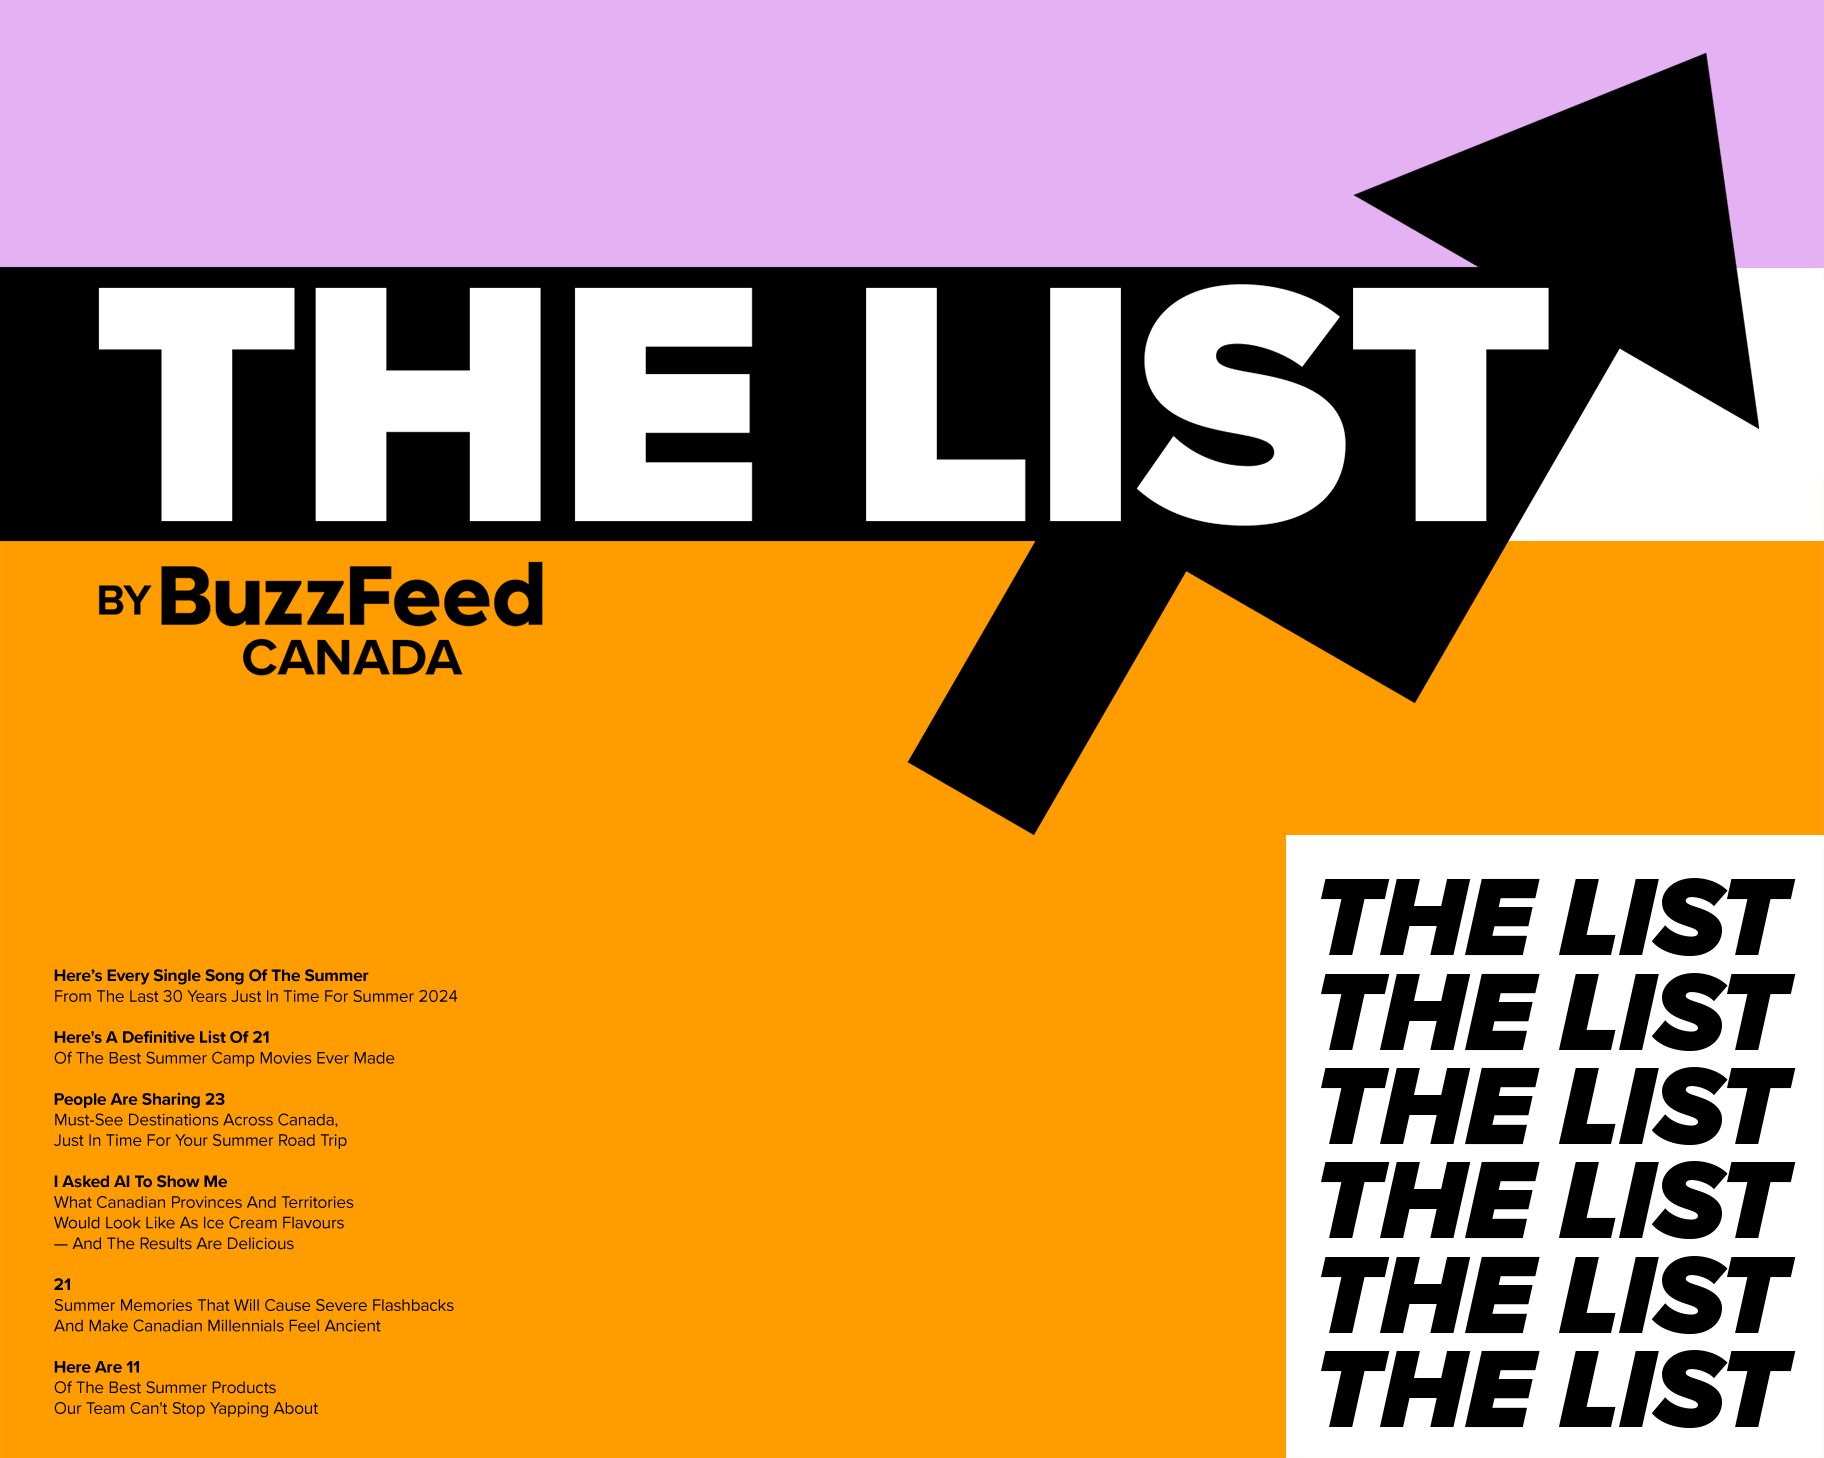 &quot;The List by BuzzFeed Canada includes &#x27;Every Single Song Of The Summer&#x27; and &#x27;Here&#x27;s A Definitive List Of 22 Of The Saddest Songs Ever Made.&#x27;&quot;